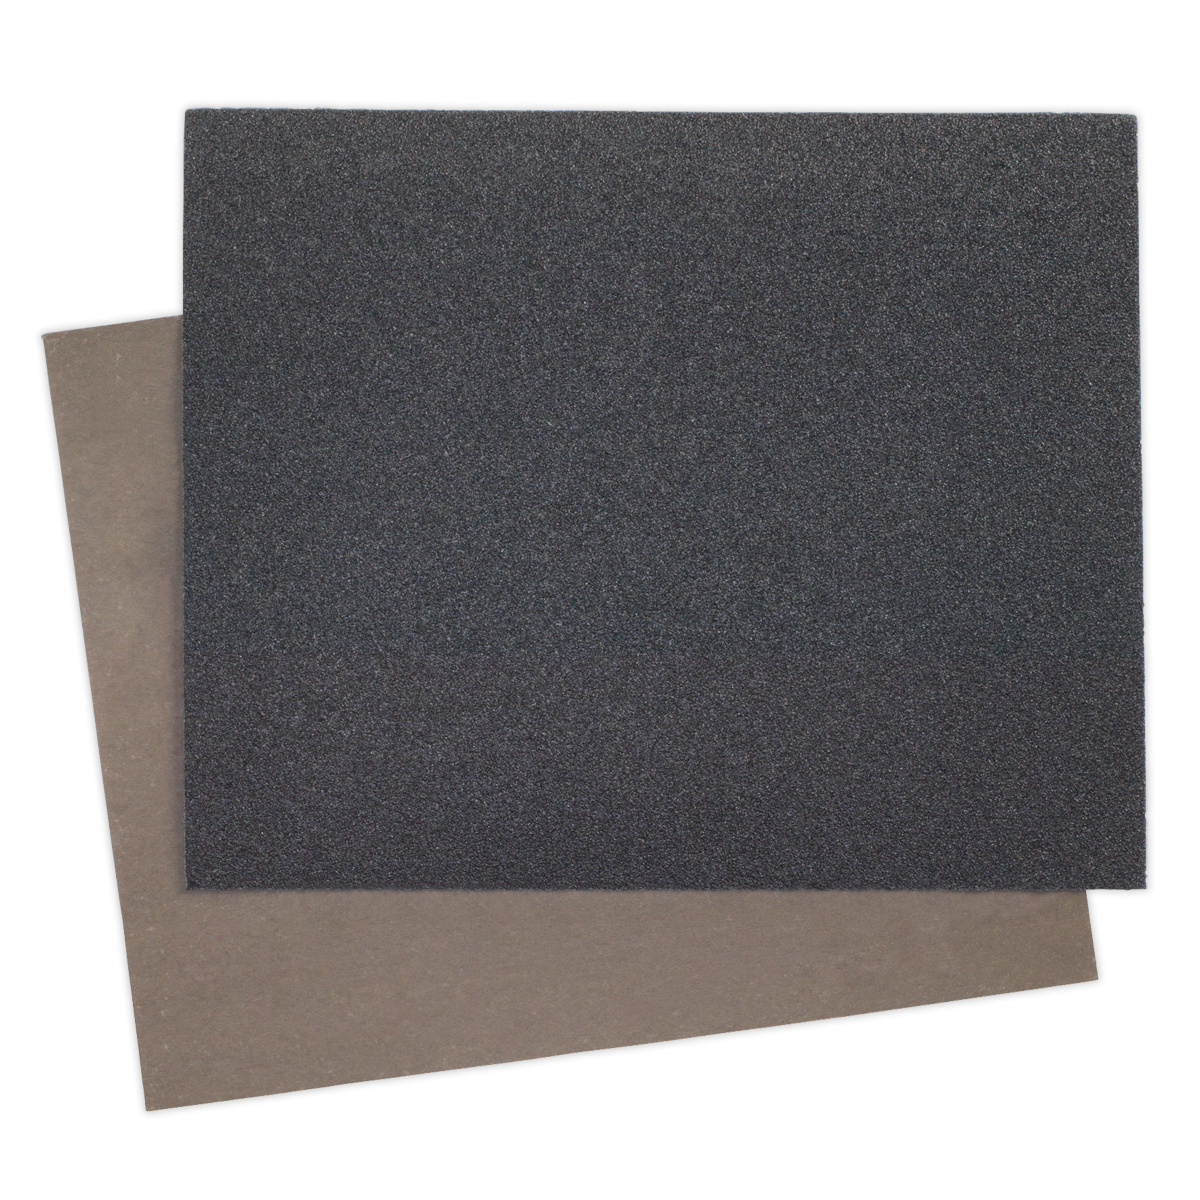 Wet & Dry Paper 230 x 280mm 600Grit Pack of 25 - WD2328600 - Farming Parts